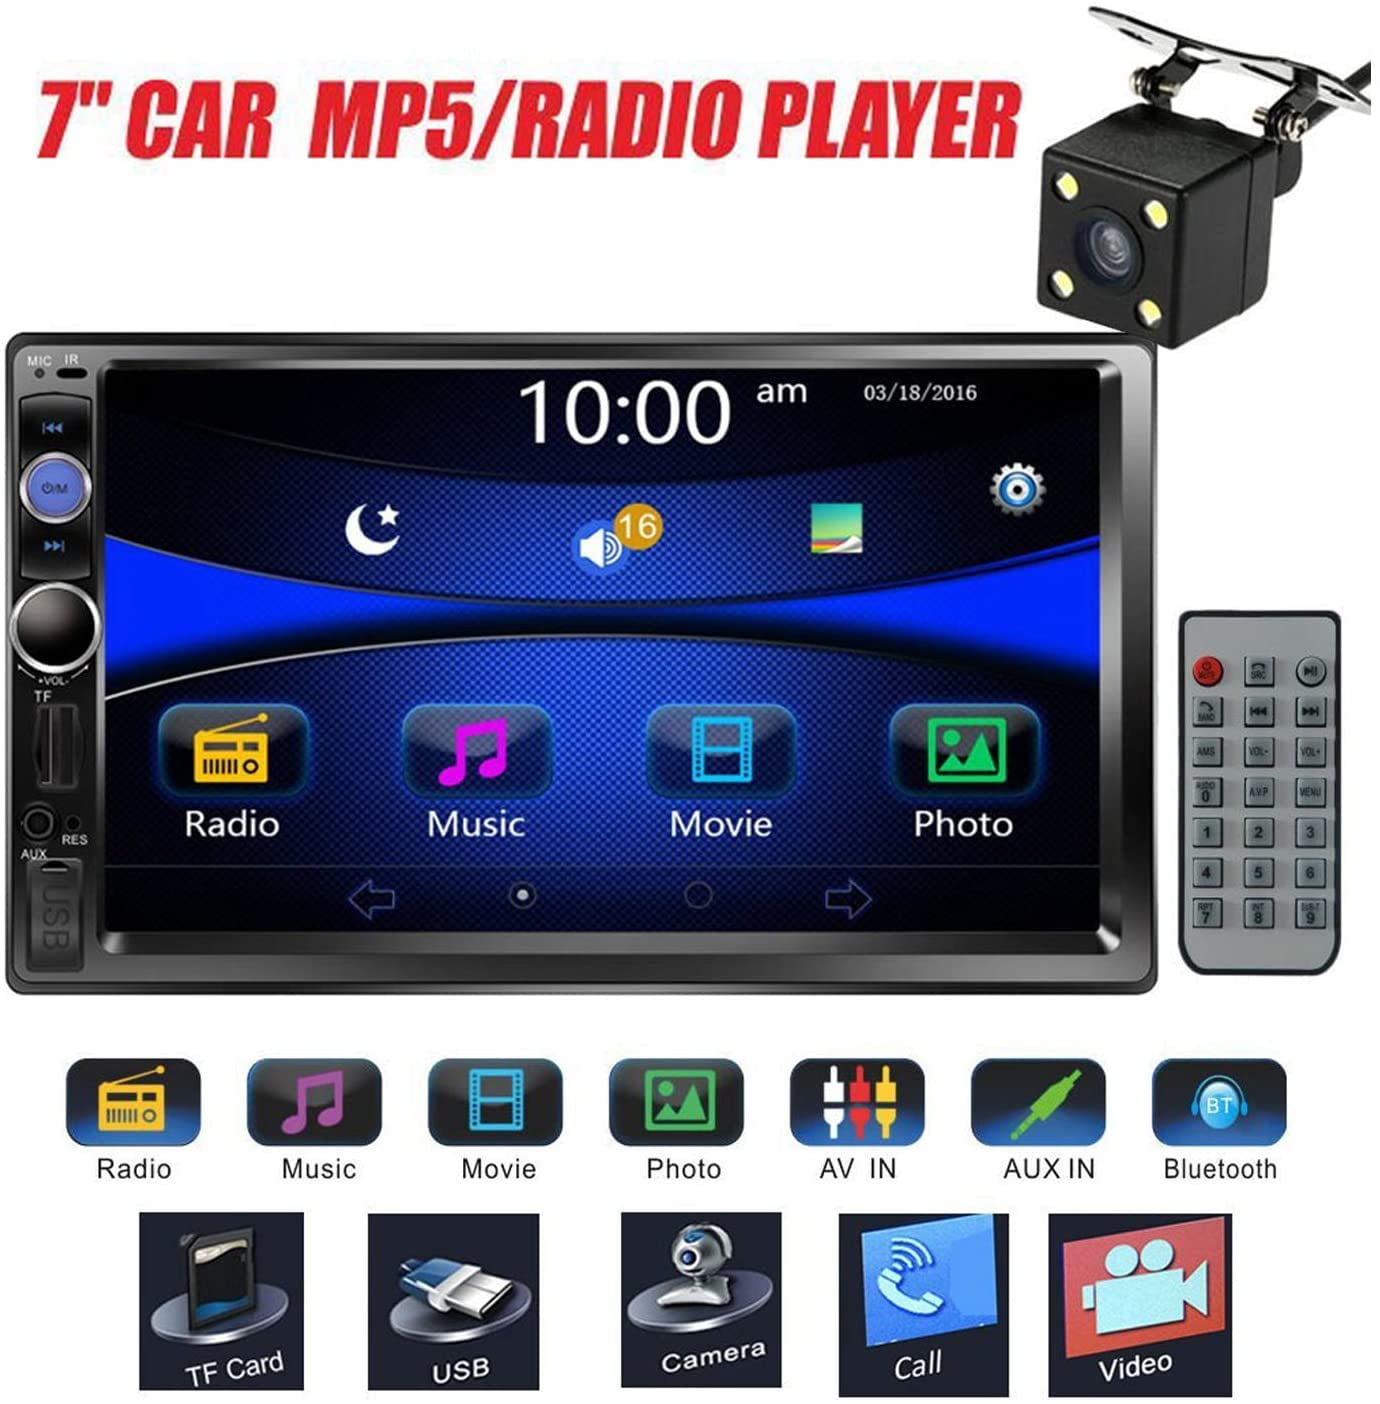 Remote Control Regetek 7 Double DIN Touchscreen in Dash Bluetooth Car Stereo Mp3 Audio 1080P Video Player FM Radio/AM Radio/TF/USB/AUX-in 